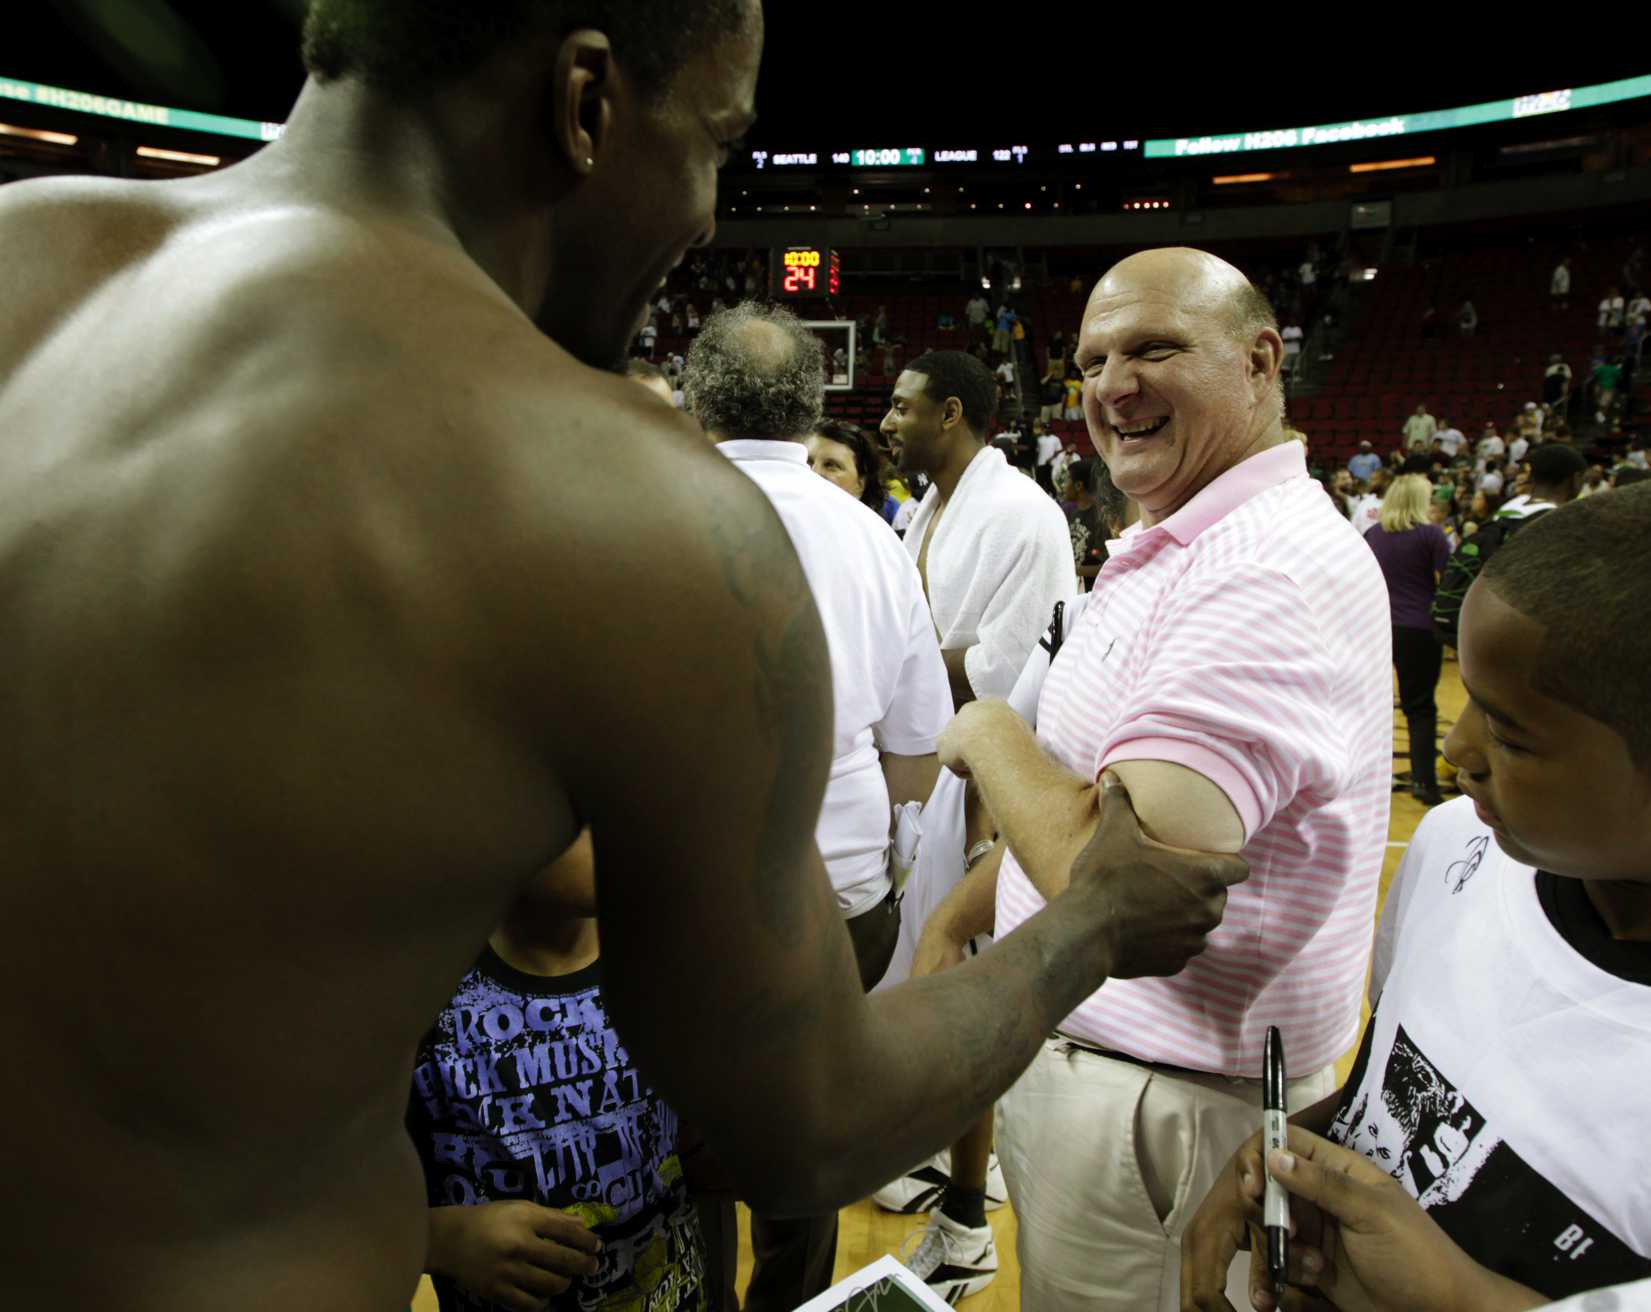 Microsoft Corp. CEO Steve Ballmer, right, reacts as Martell Webster, left, of the NBA's Minnesota Timberwolves, checks the size of Ballmer's bicep, following a charity basketball game, Saturday, July 23, 2011, in Seattle. (Ted S. Warren—AP)